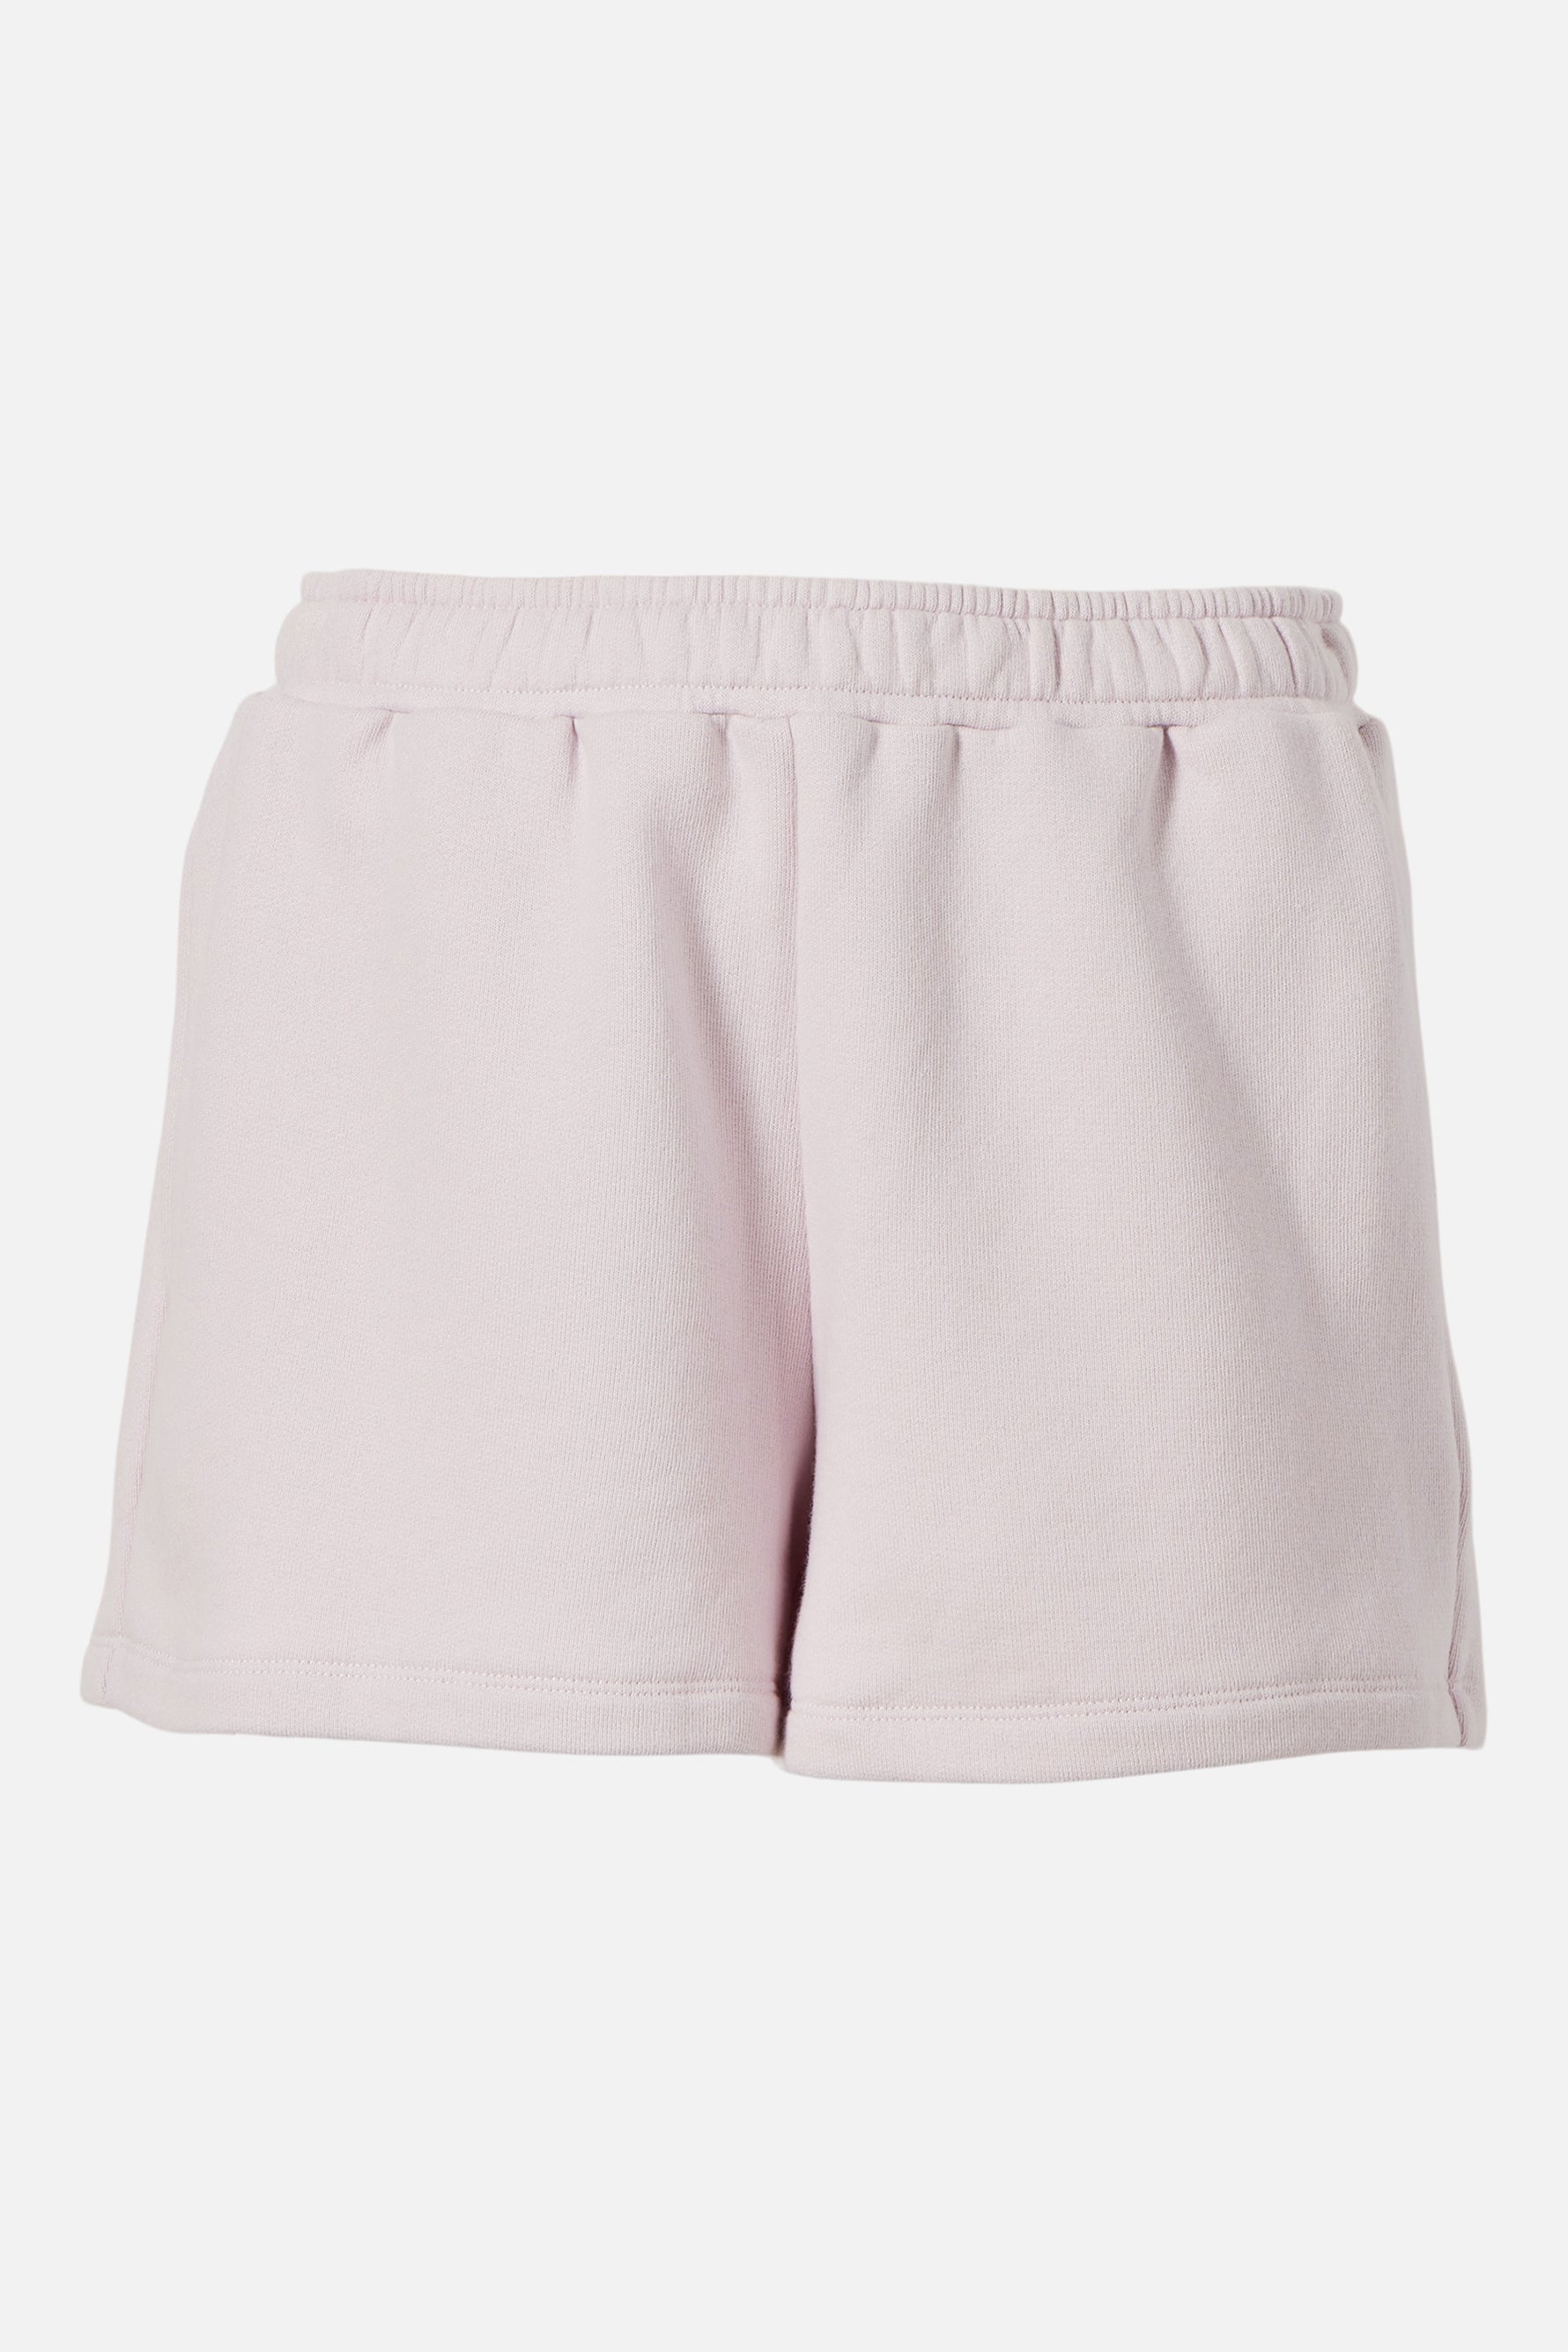 Vesey Cotton Terry Sweat Short